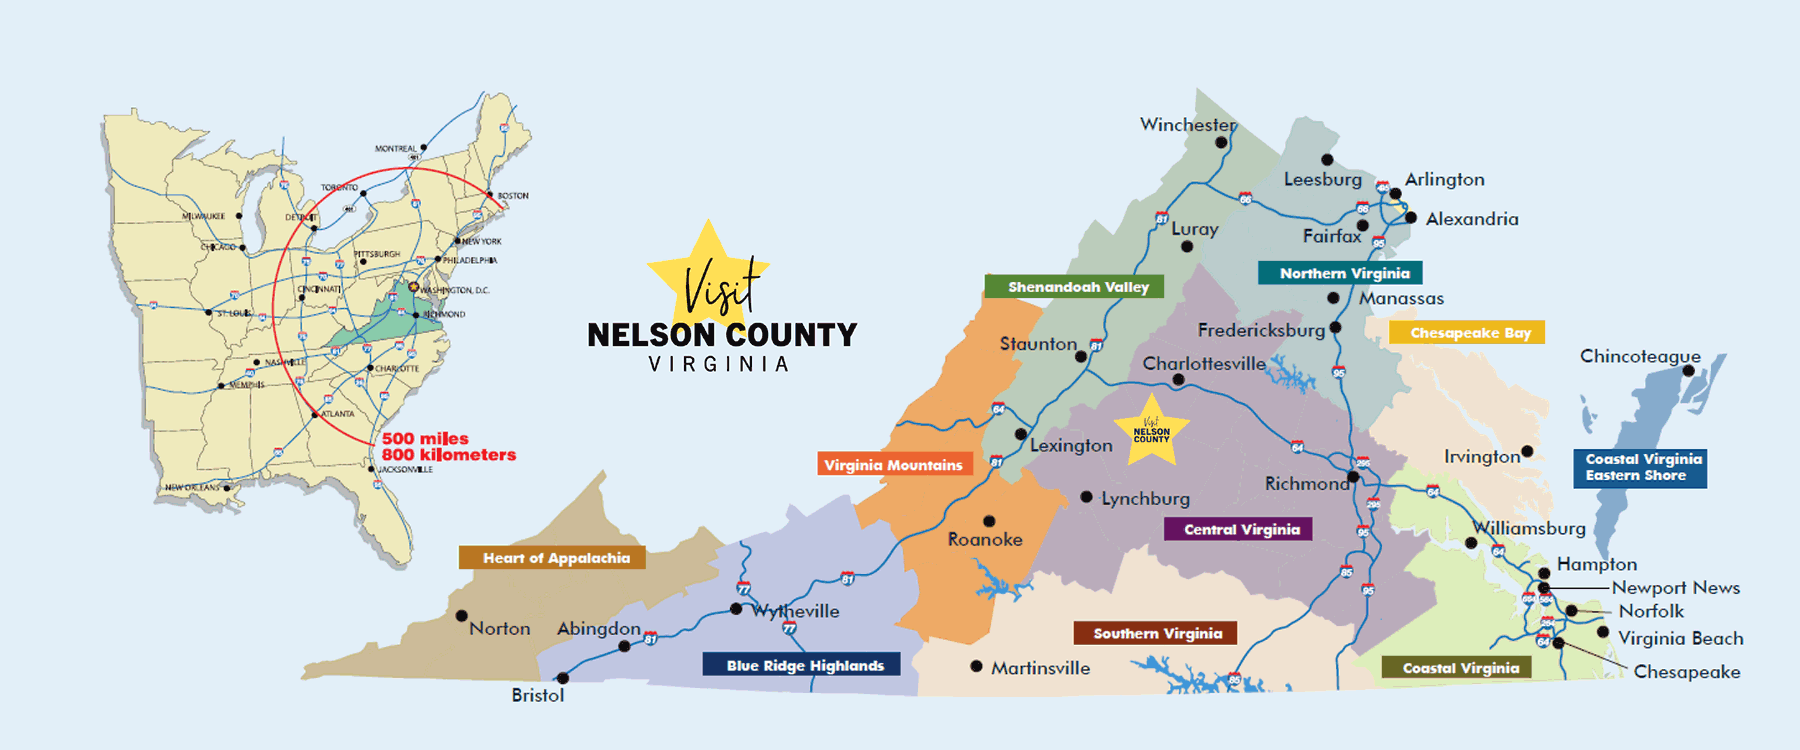 Map of Virginia with Nelson County location